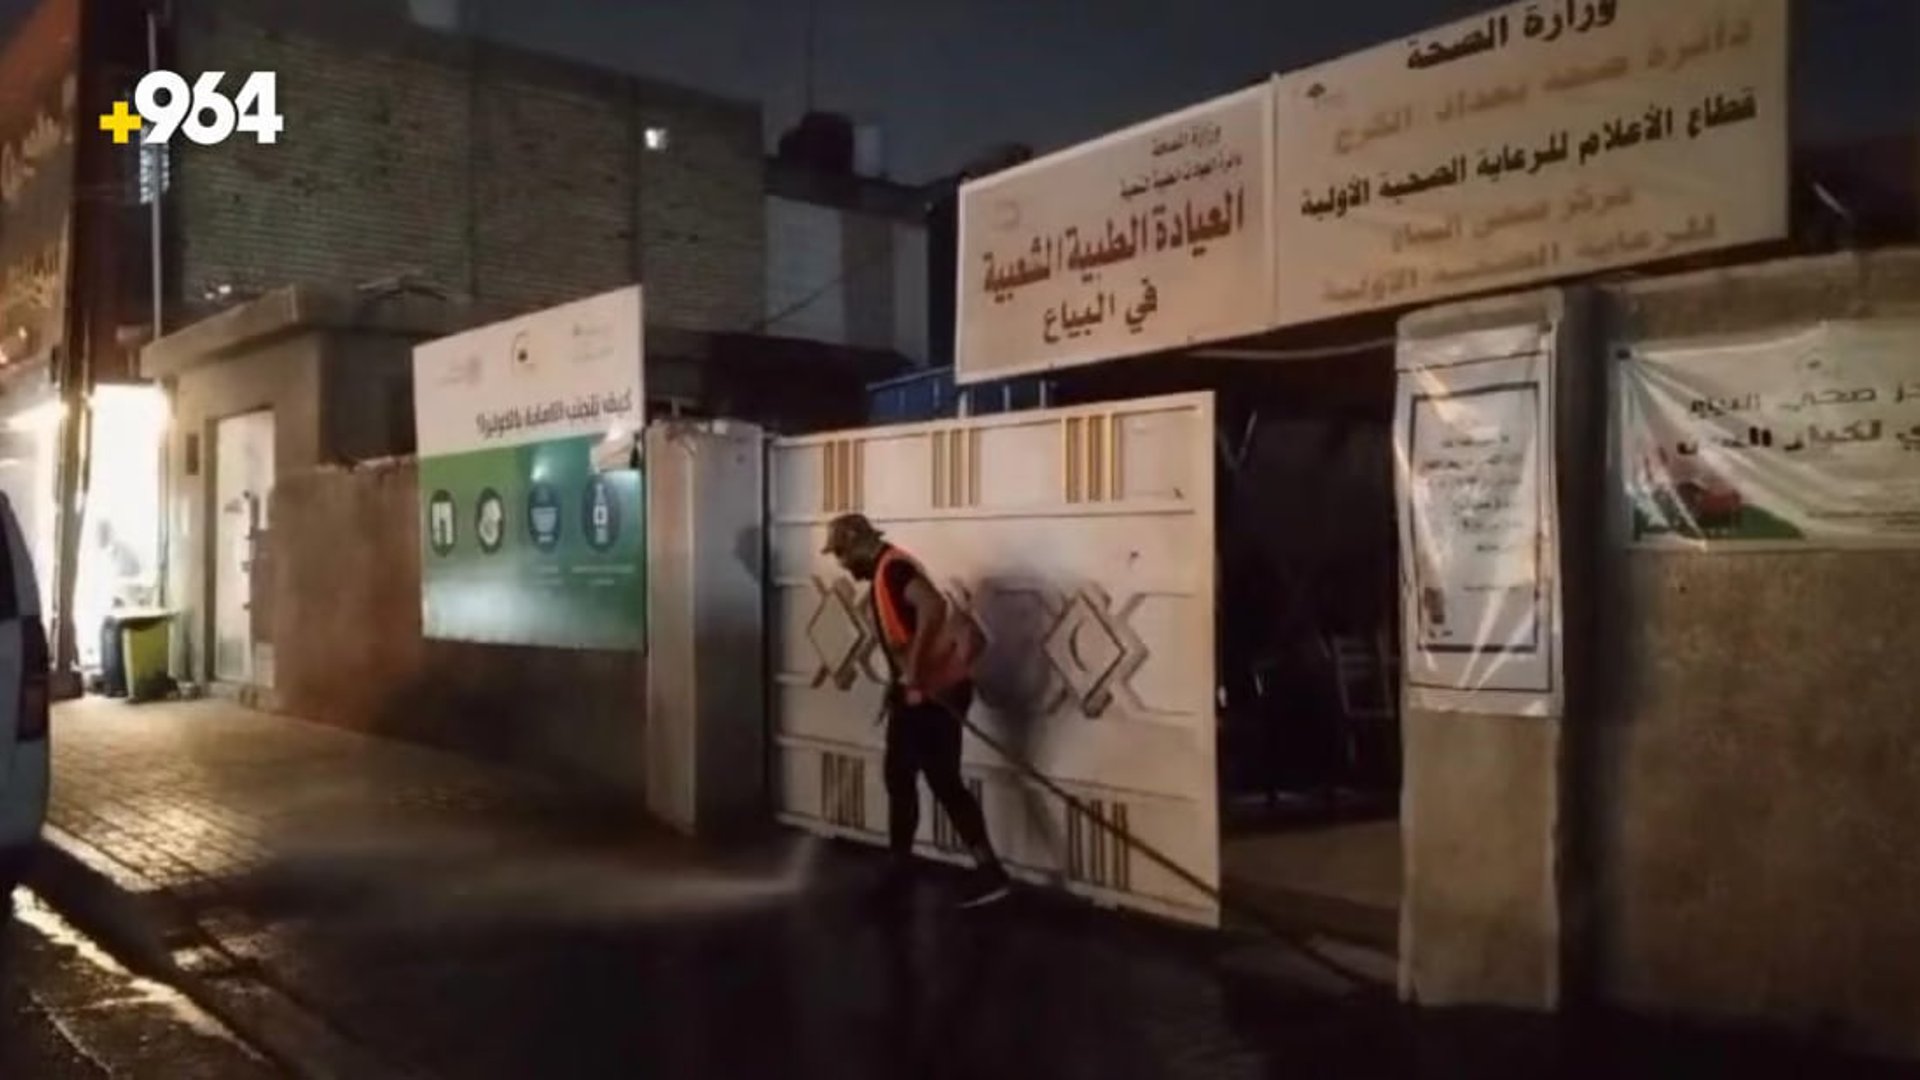 Municipality teams start latenight street cleaning in Baghdads AlBaya district